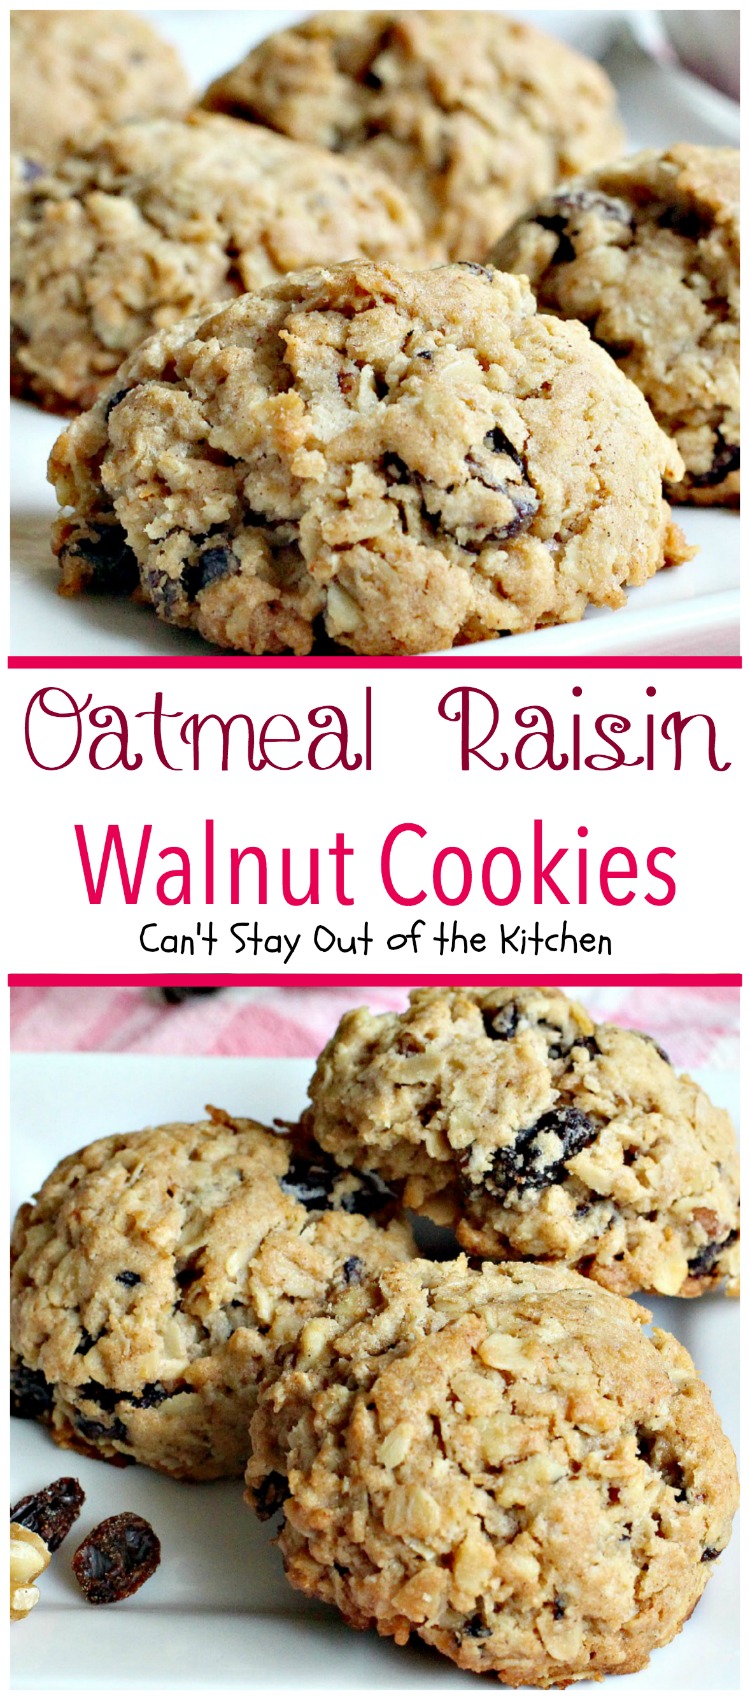 Oatmeal Raisin Walnut Cookies | Can't Stay Out of the Kitchen